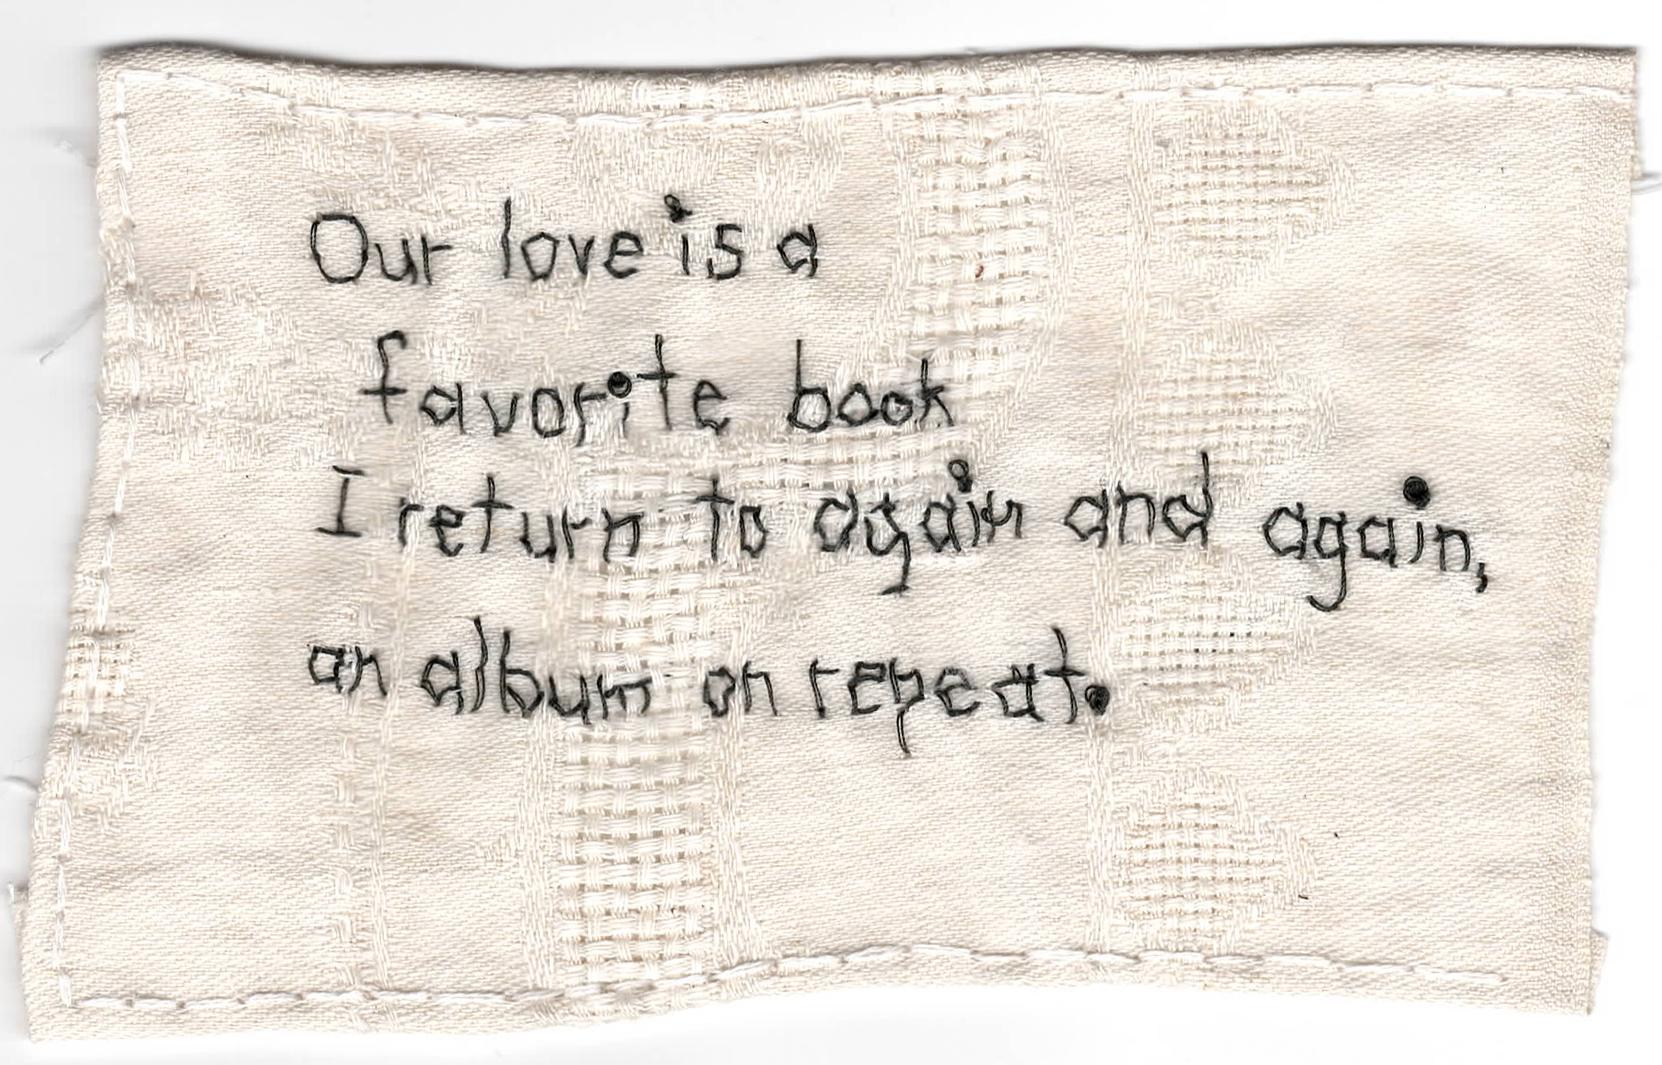 Our love is a favorite book- love narrative embroidery on fabric